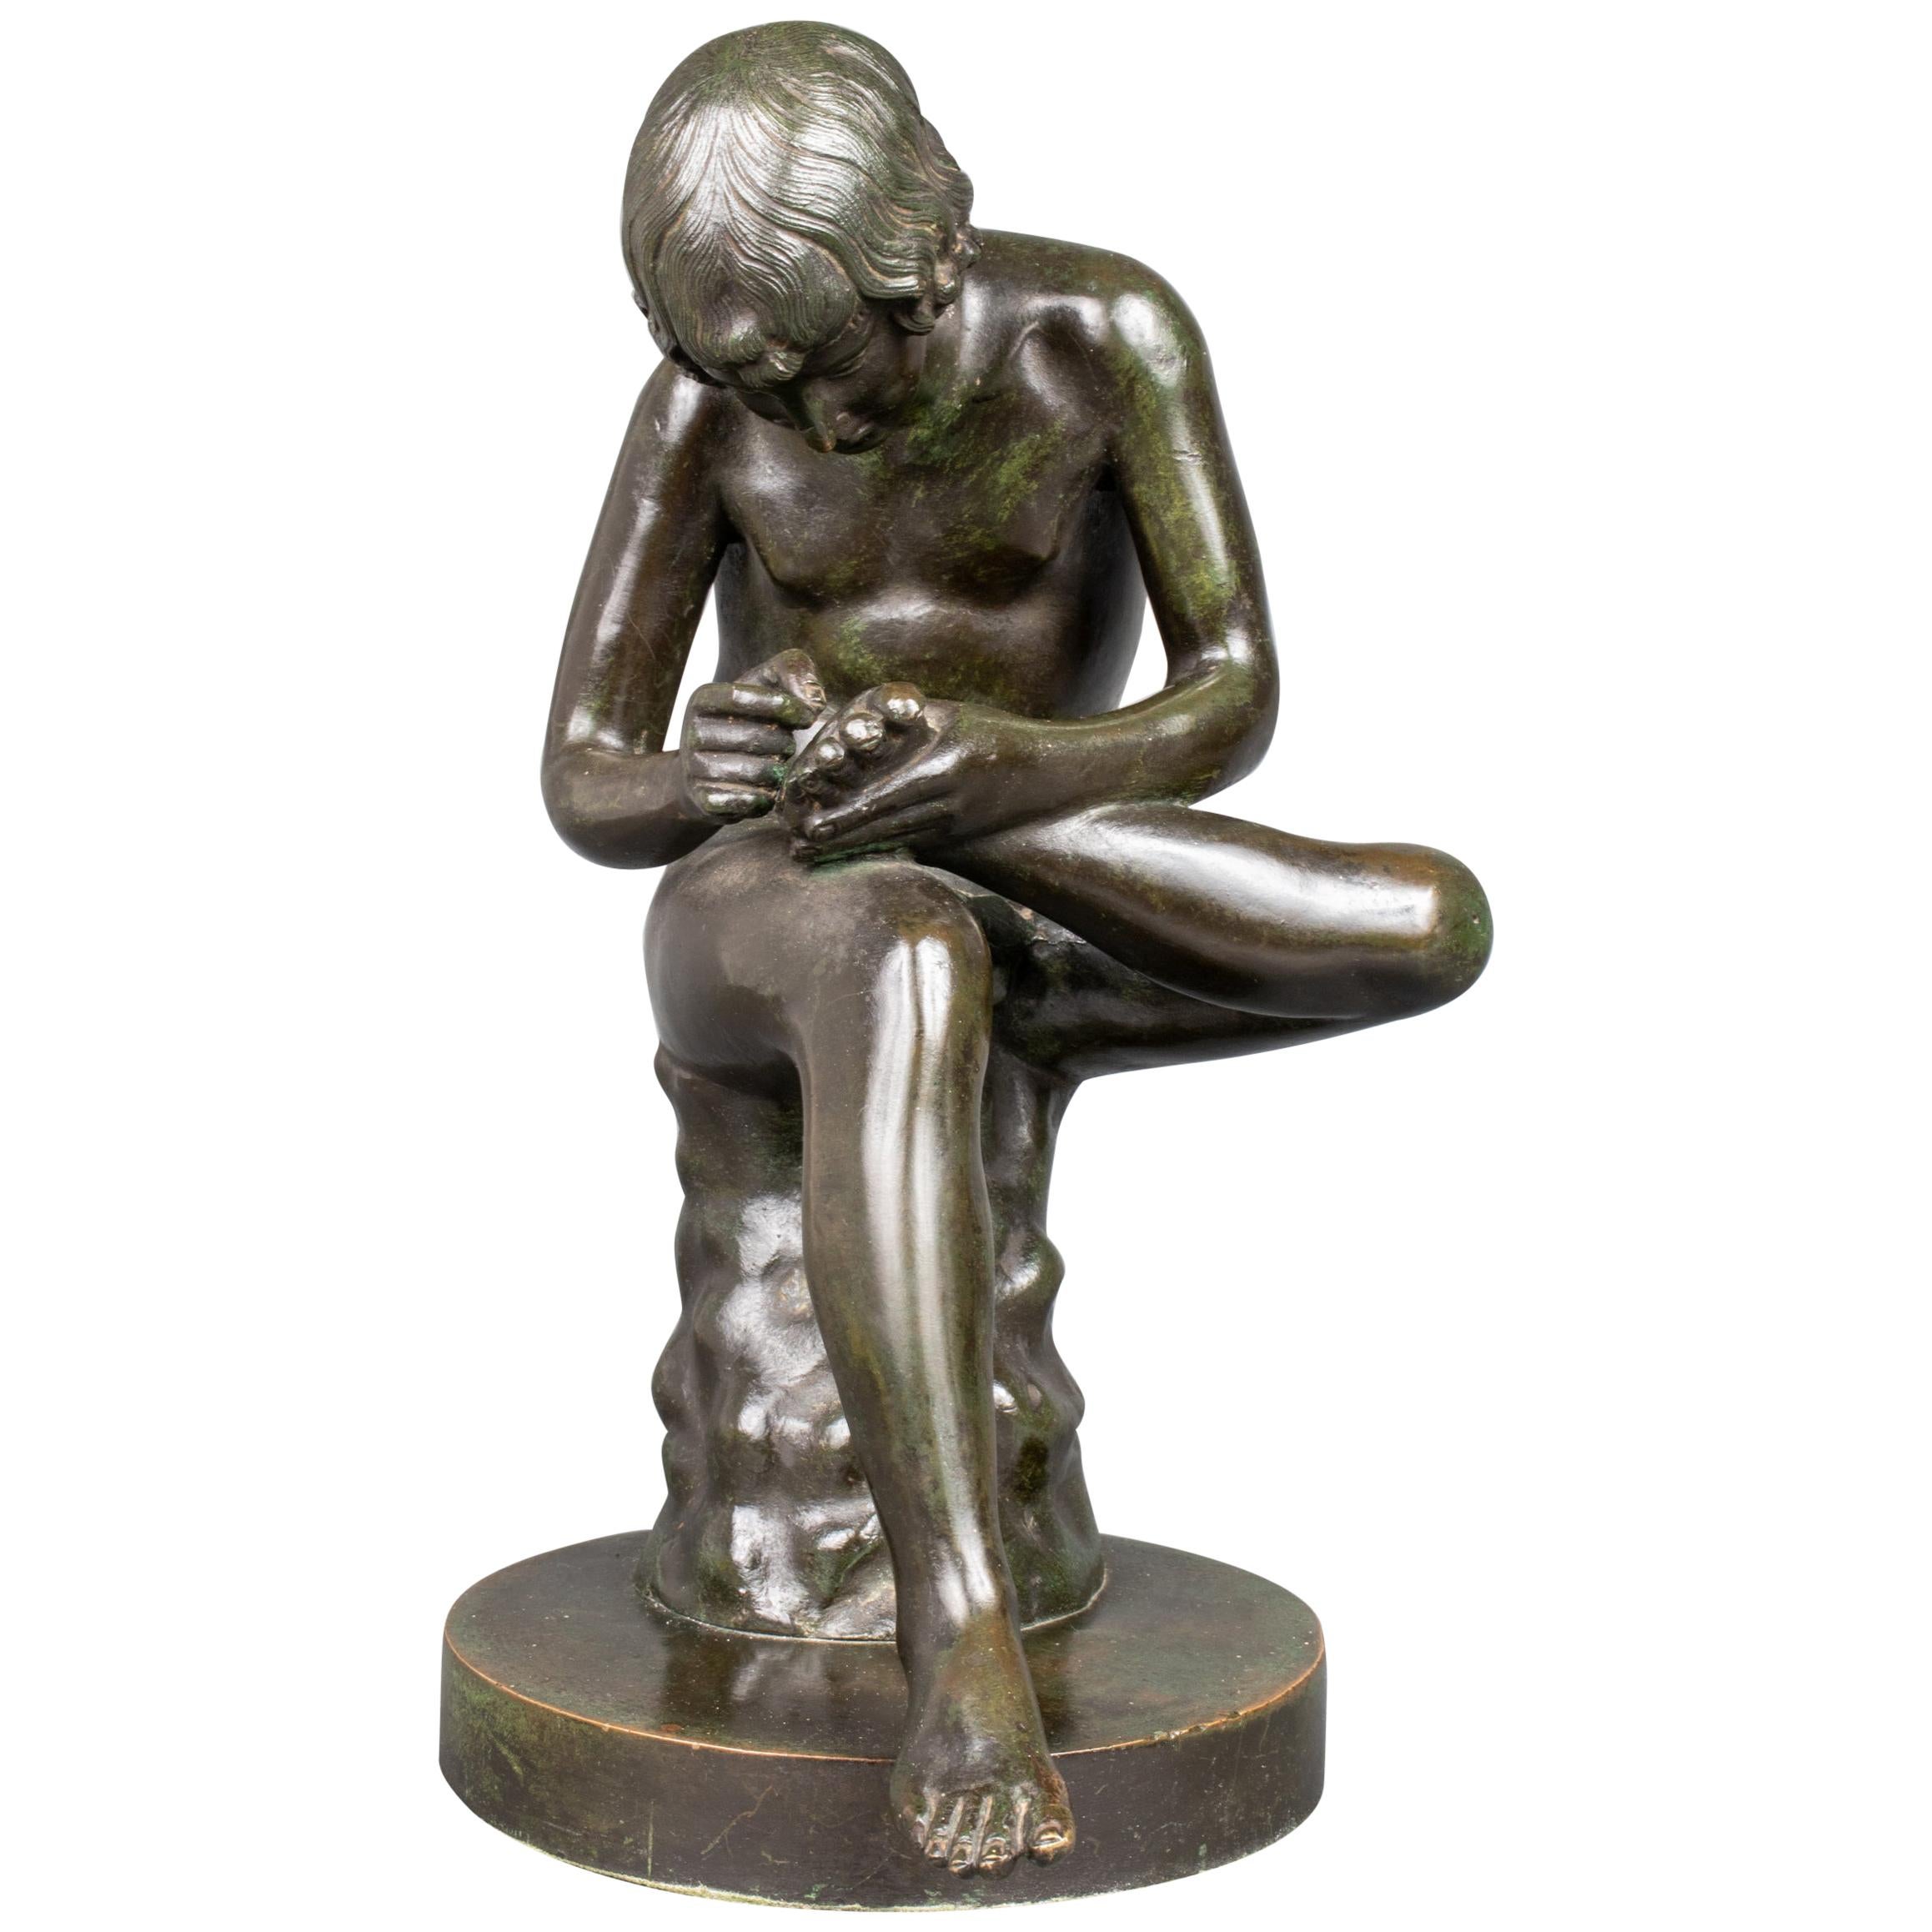 Grand Tour "Boy With Thorn" or "Spinario" Bronze Sculpture